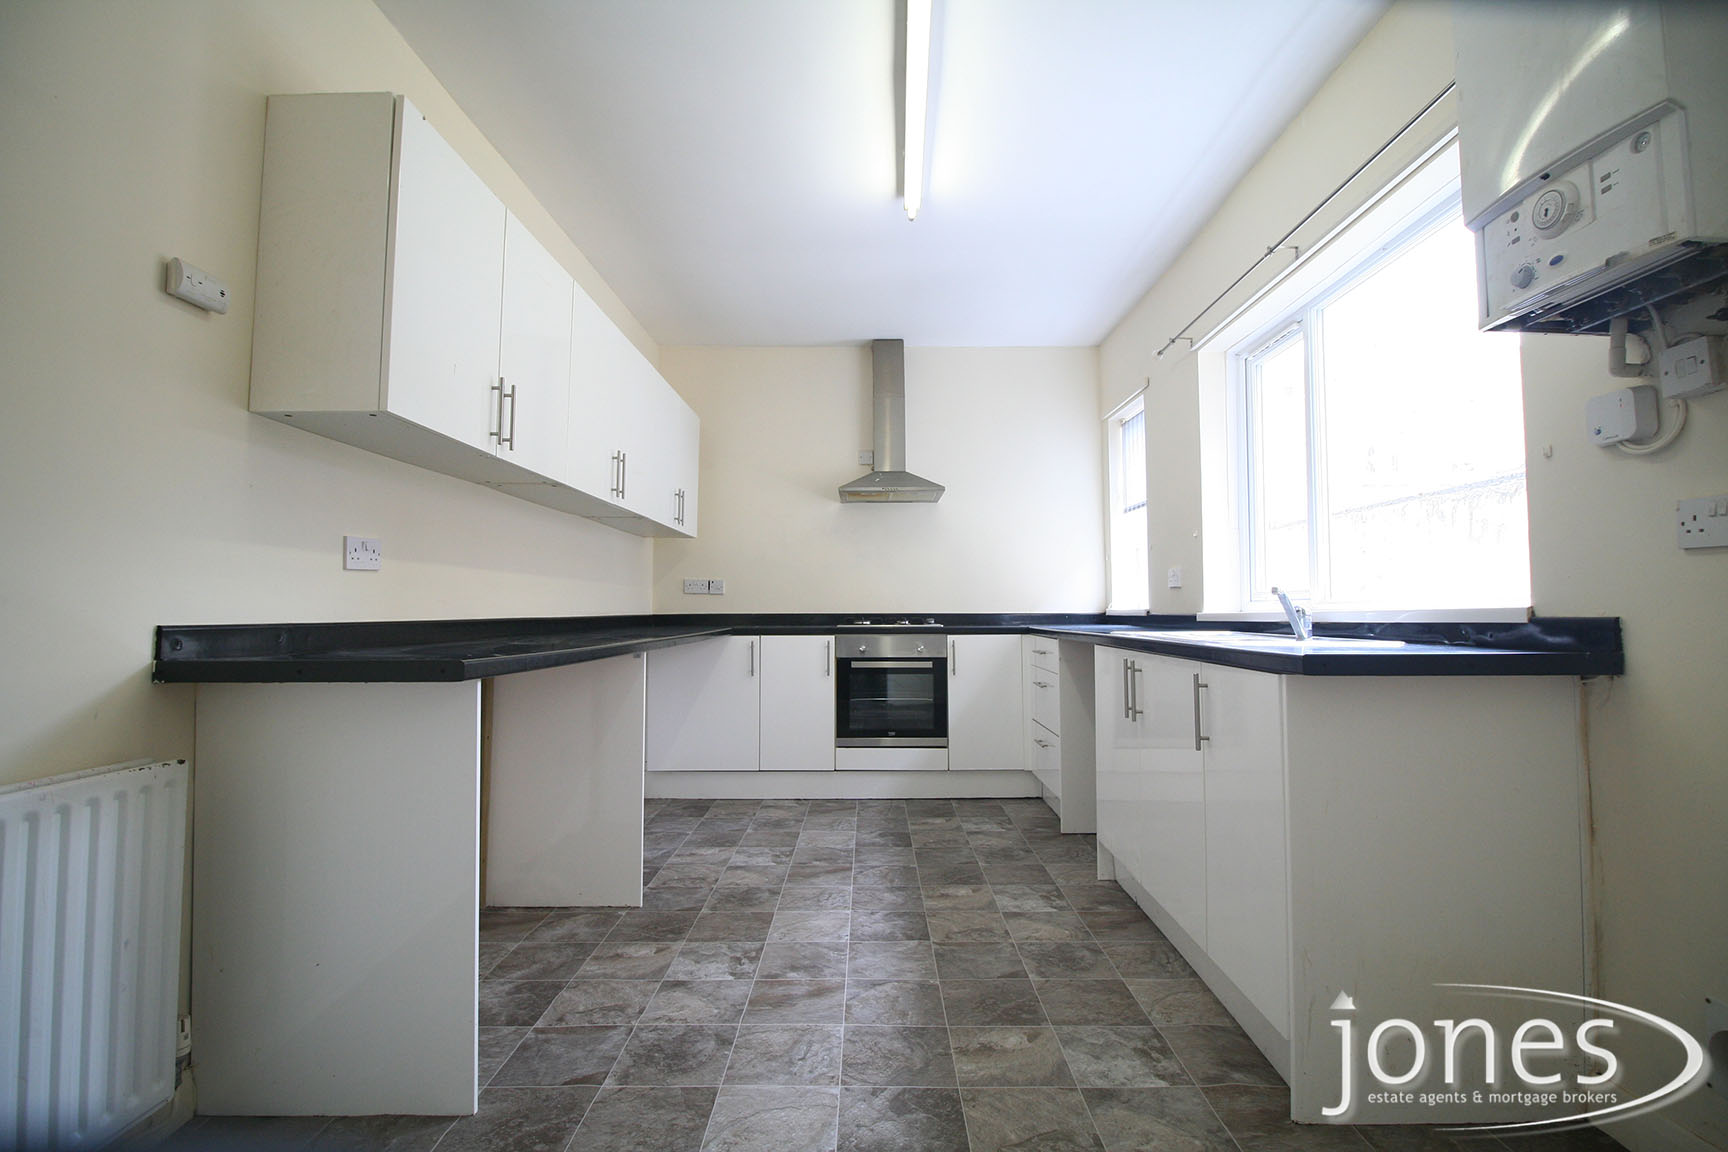 Home for Sale Let - Photo 04 Victoria Road,  Thornaby, Stockton on Tees TS17 6HH